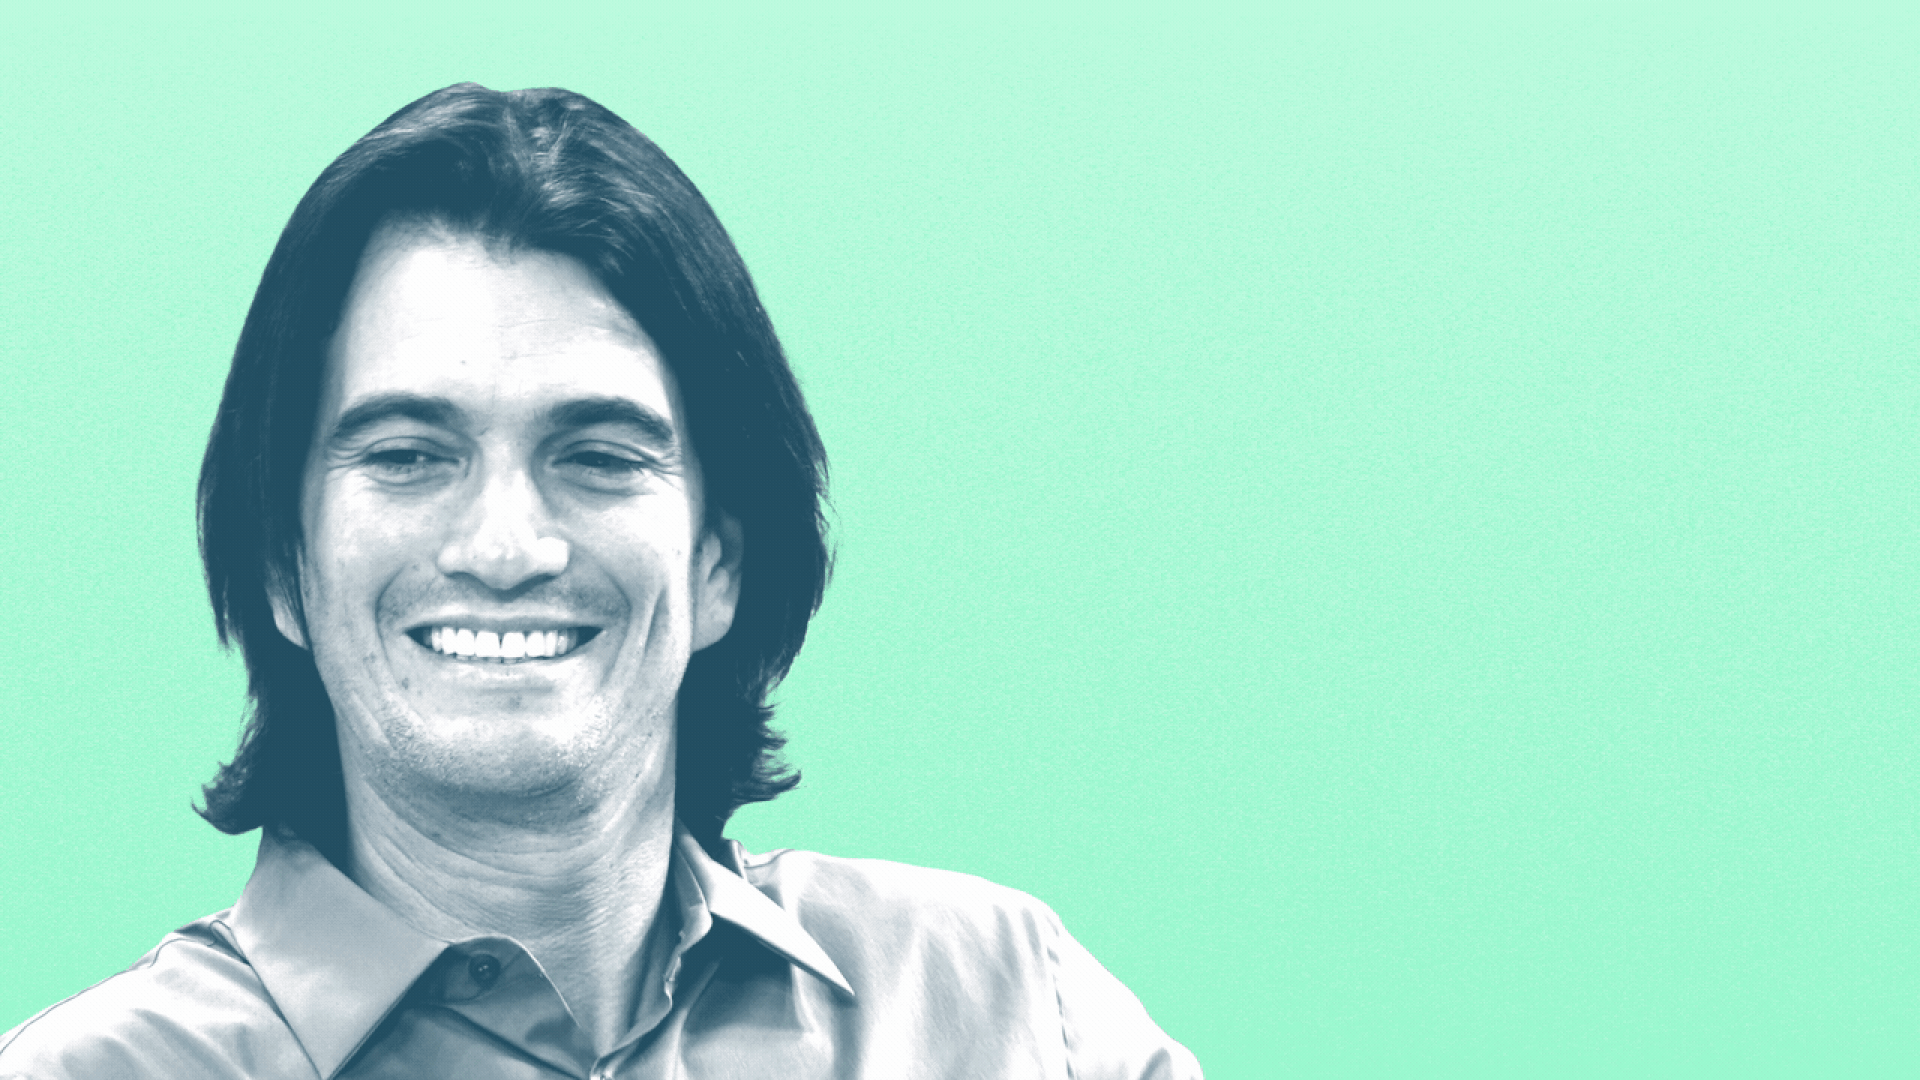 Photo illustration of Flow founder Adam Neumann with pixelated sunglasses moving over his face.